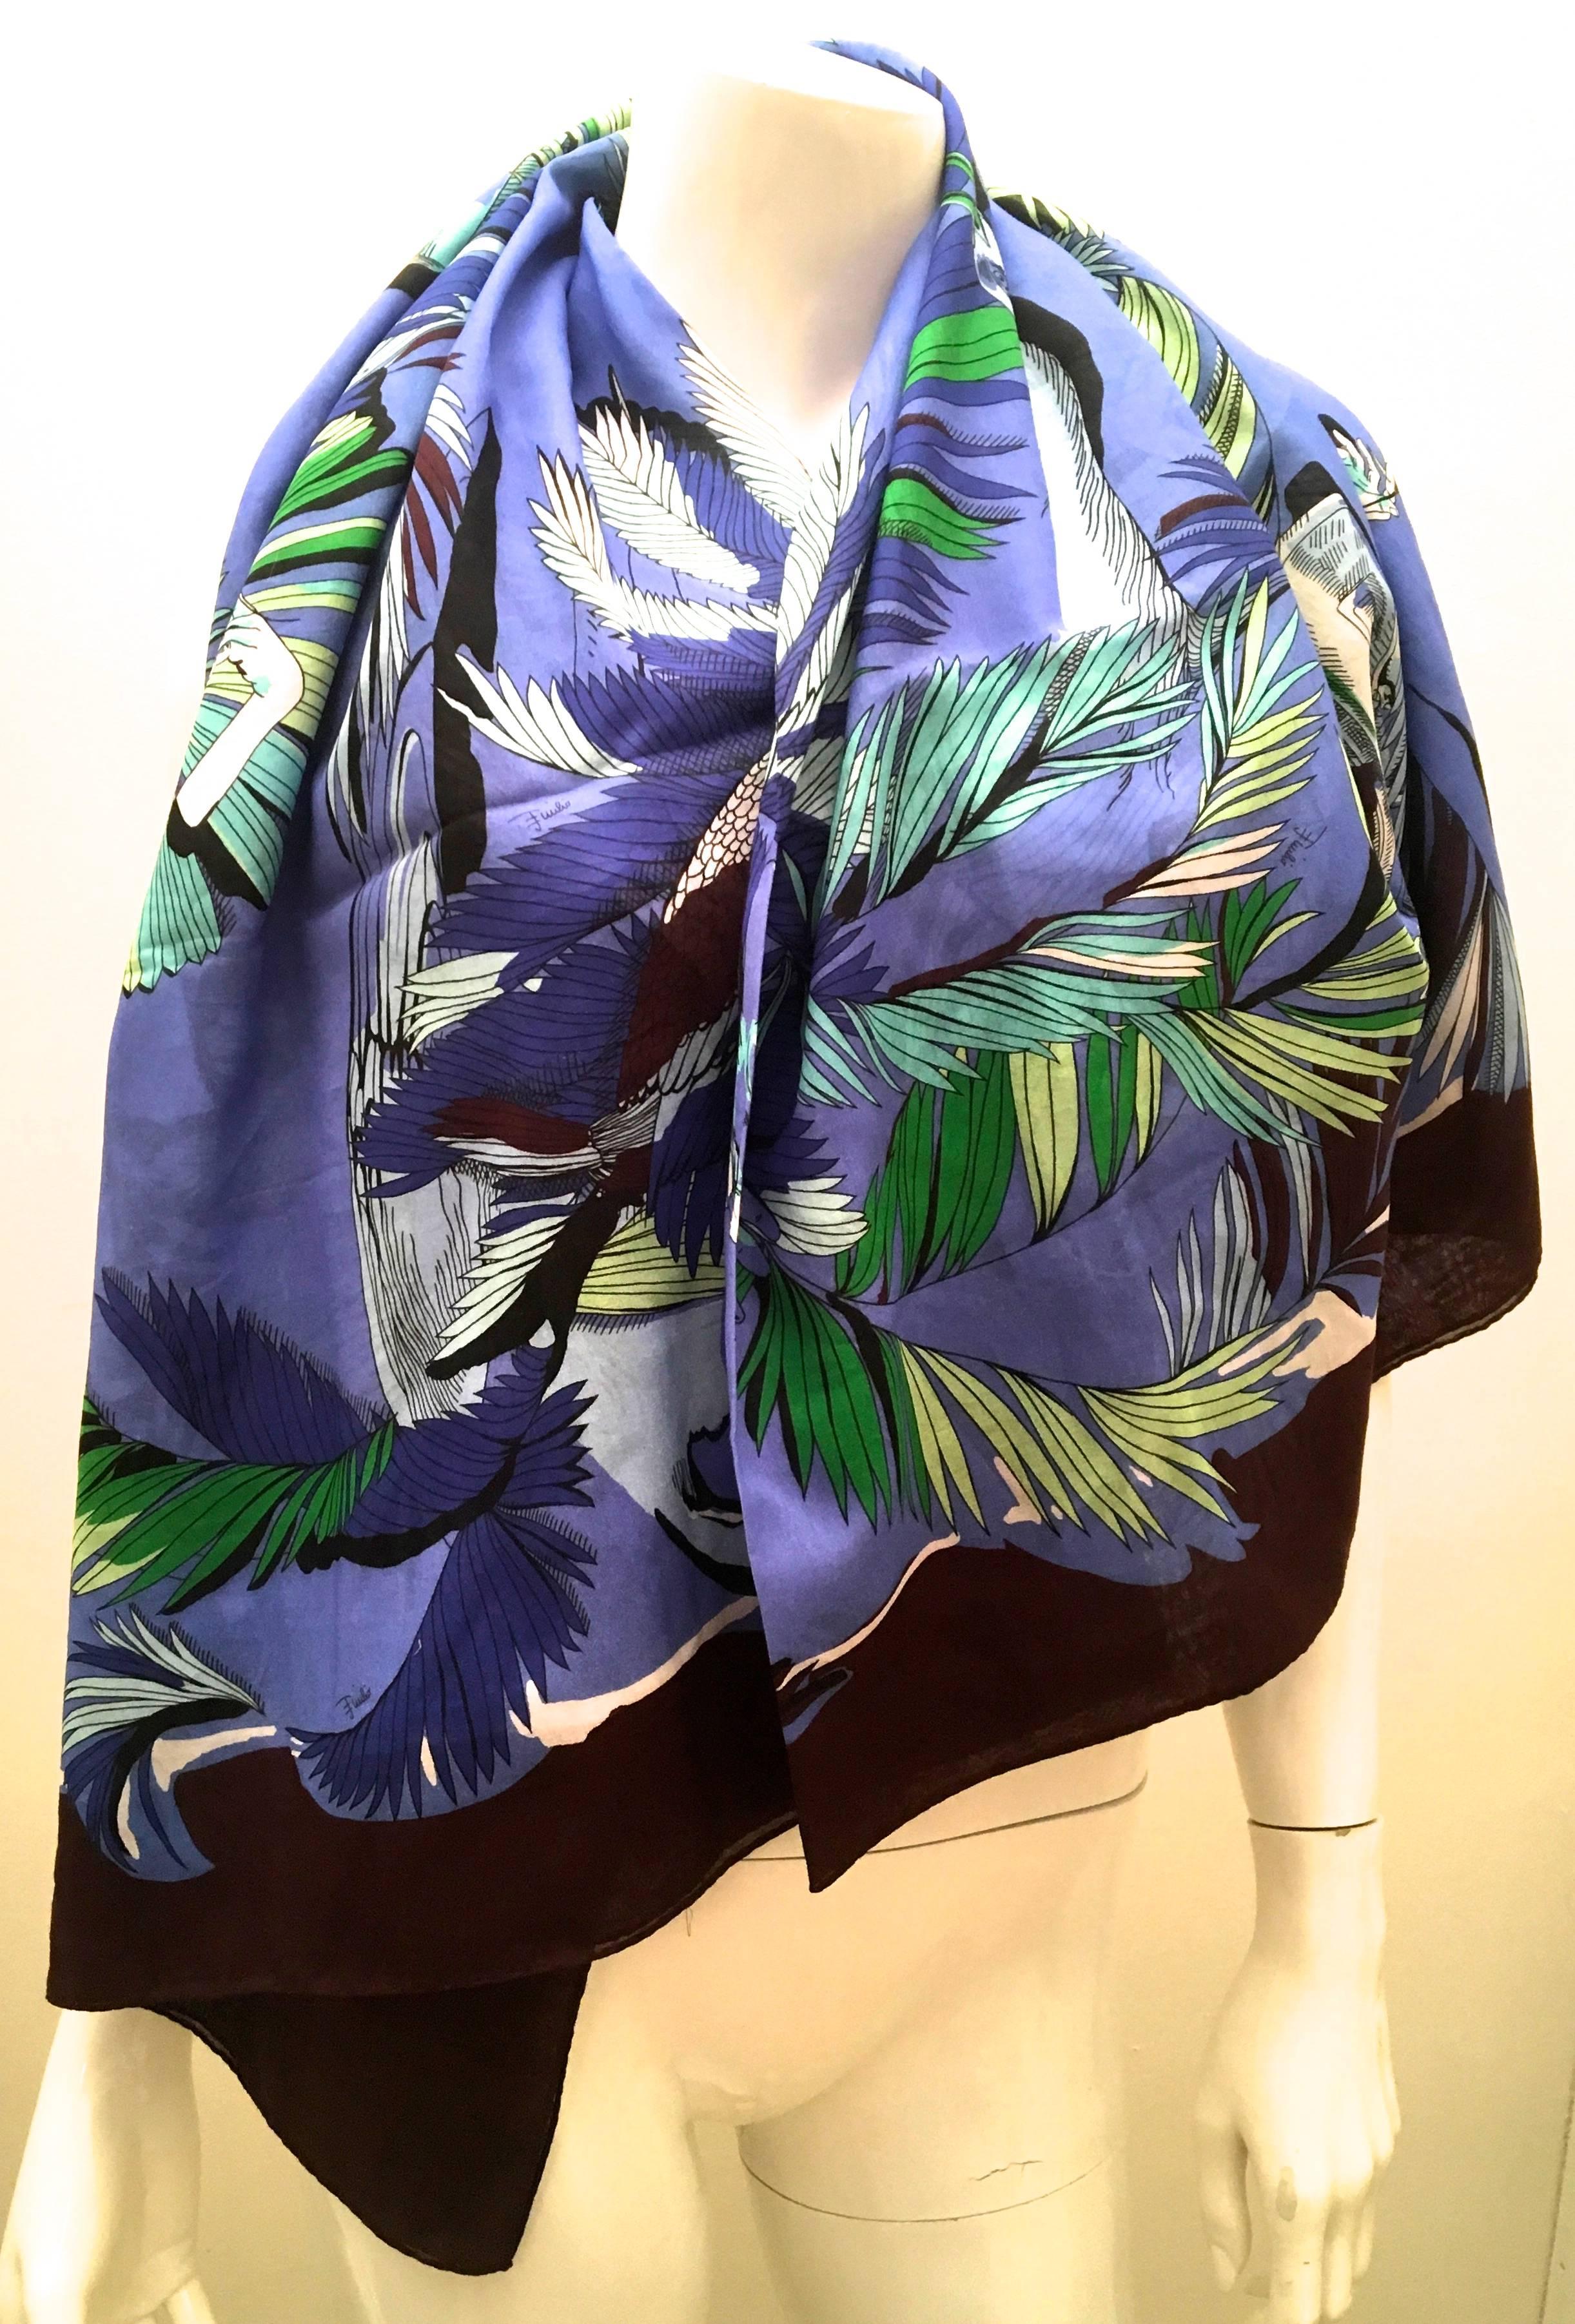 Presented here is a beautiful pareo / shawl from Emilio Pucci. The pareo is a design that is distinctively Emilio Pucci. Throughout the design of the pareo, colors of dark maroon, shades of blue, green and white are incorporated. The image is